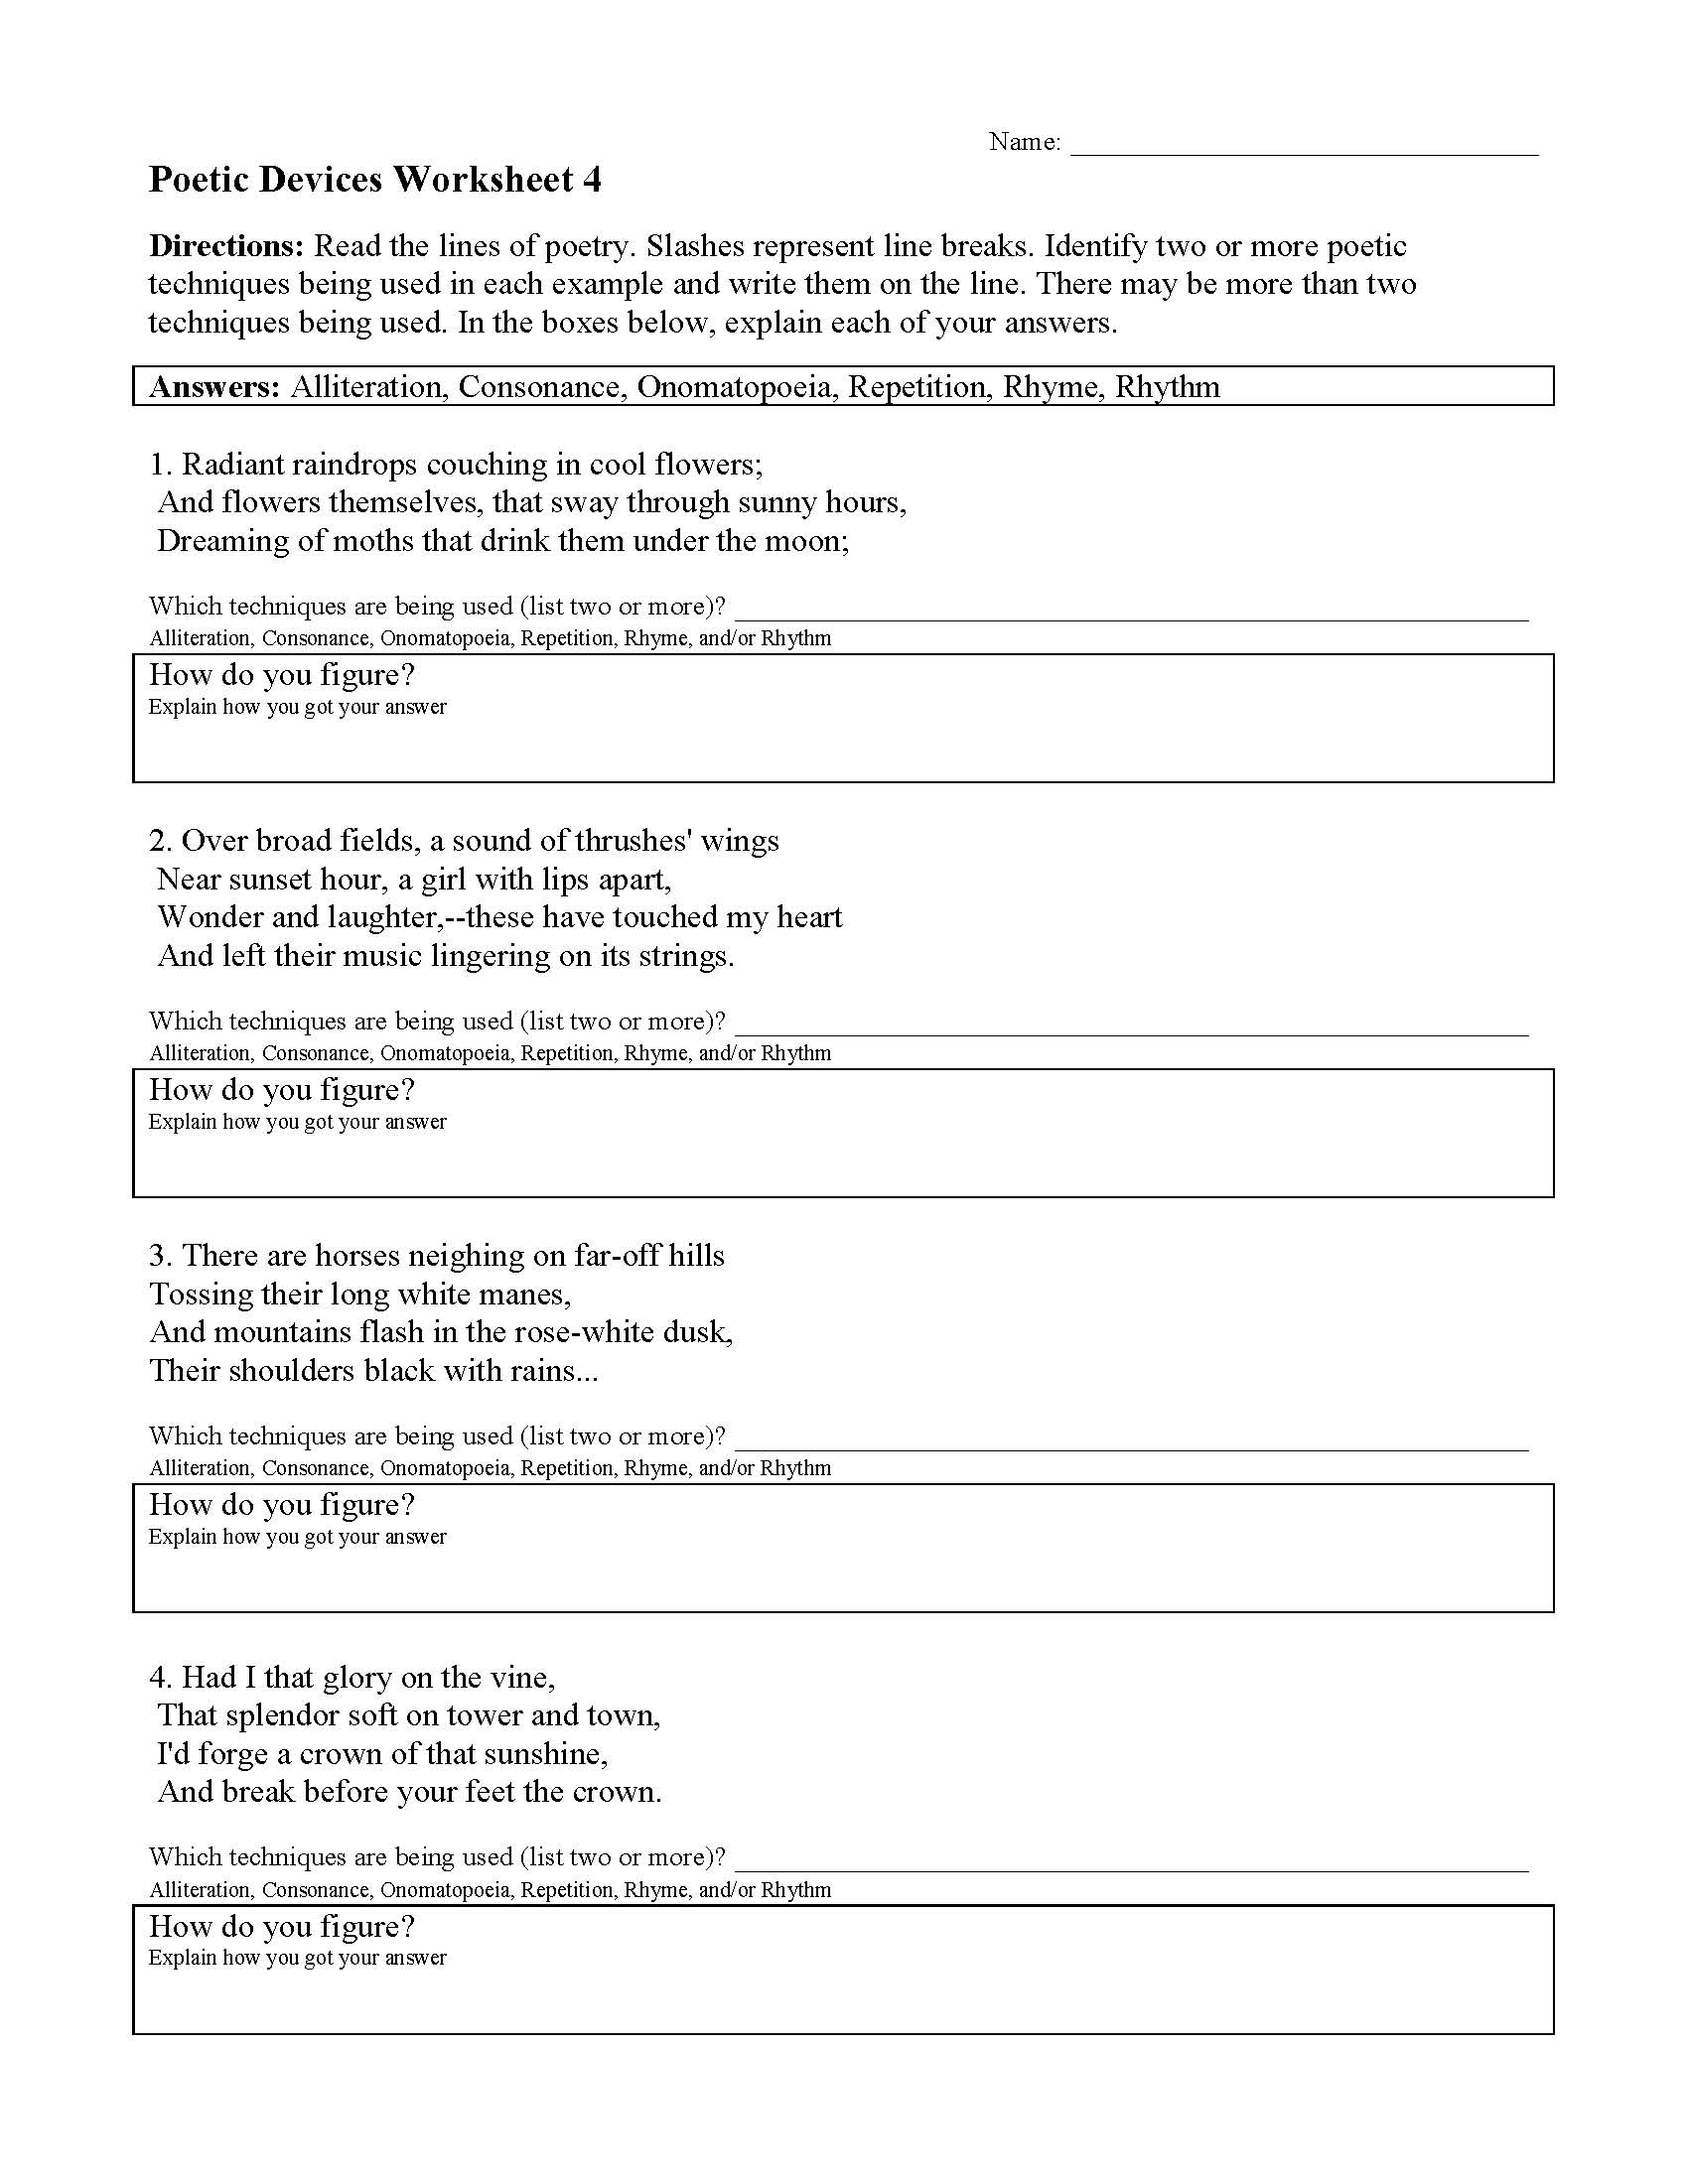 Poetic Devices Worksheet 21  Reading Activity For Literary Devices Worksheet Pdf